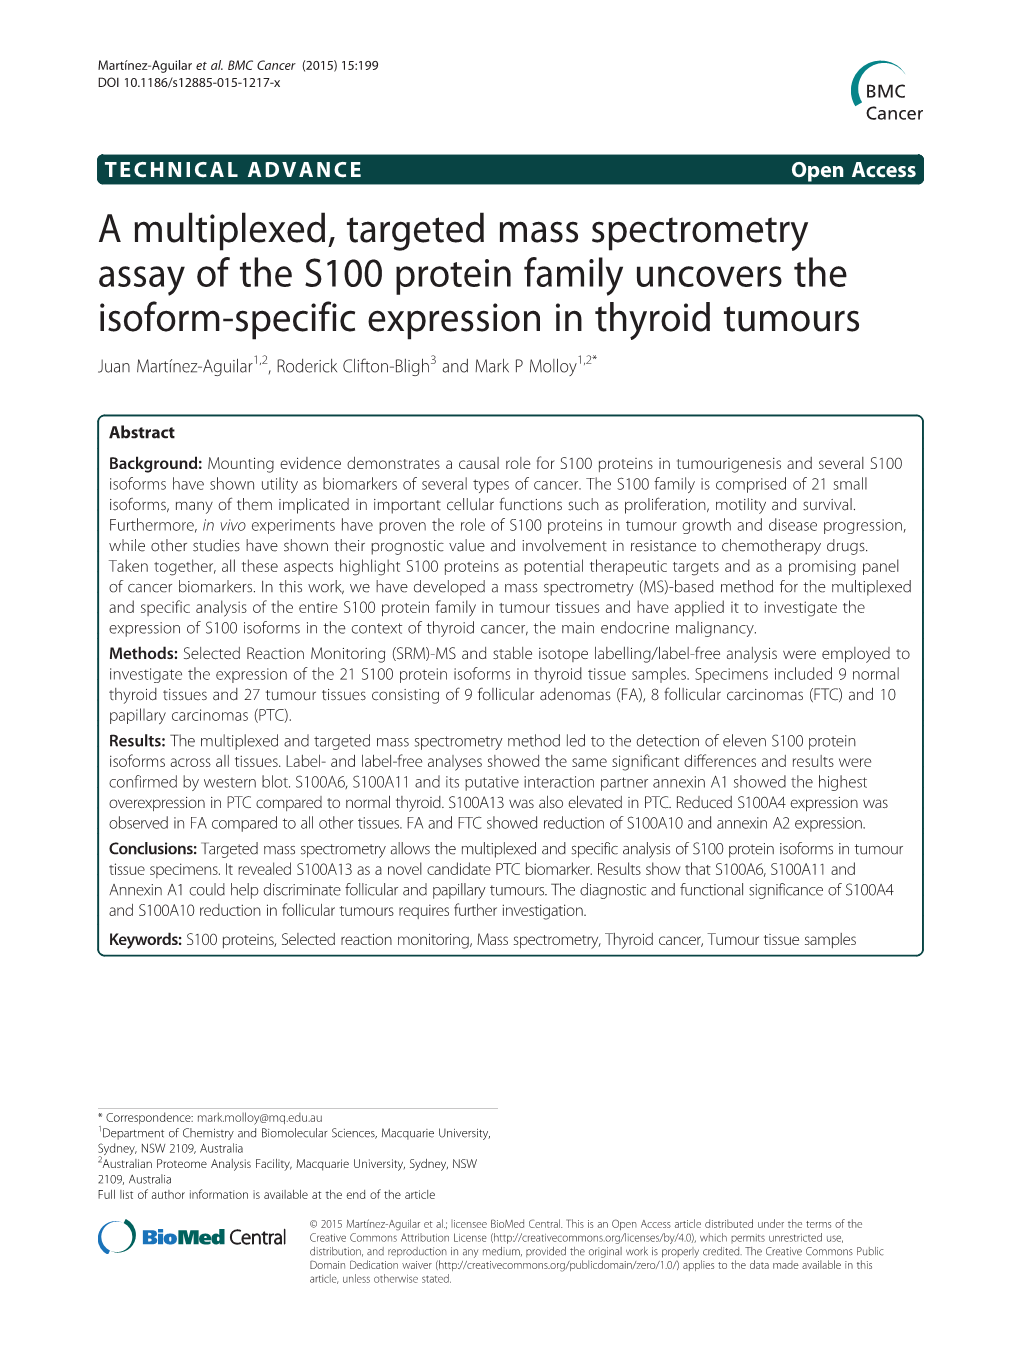 A Multiplexed, Targeted Mass Spectrometry Assay of the S100